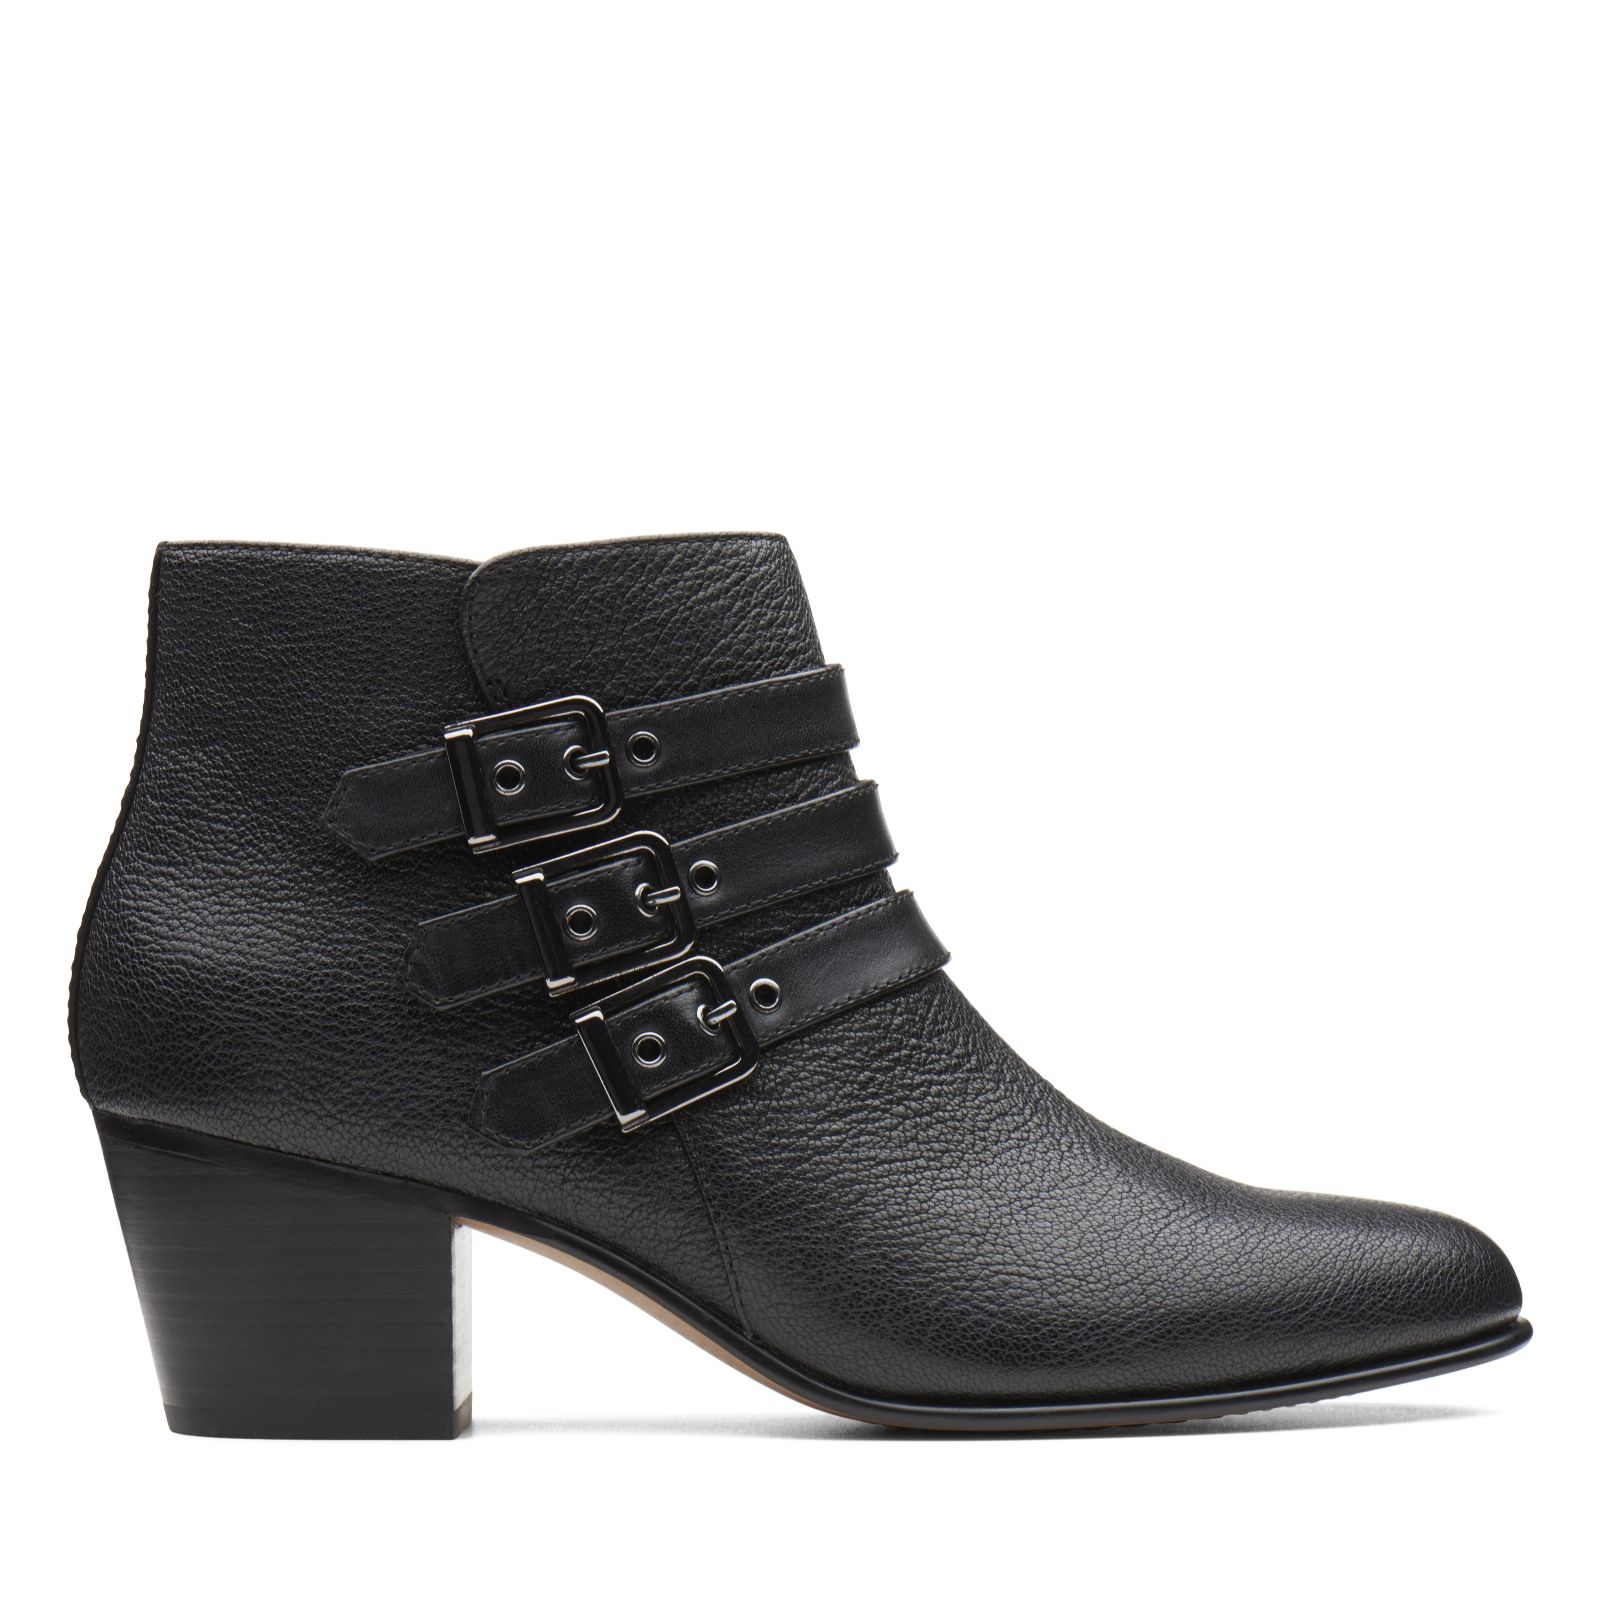 Clarks Maypearl Rayna Buckle Ankle Boot 